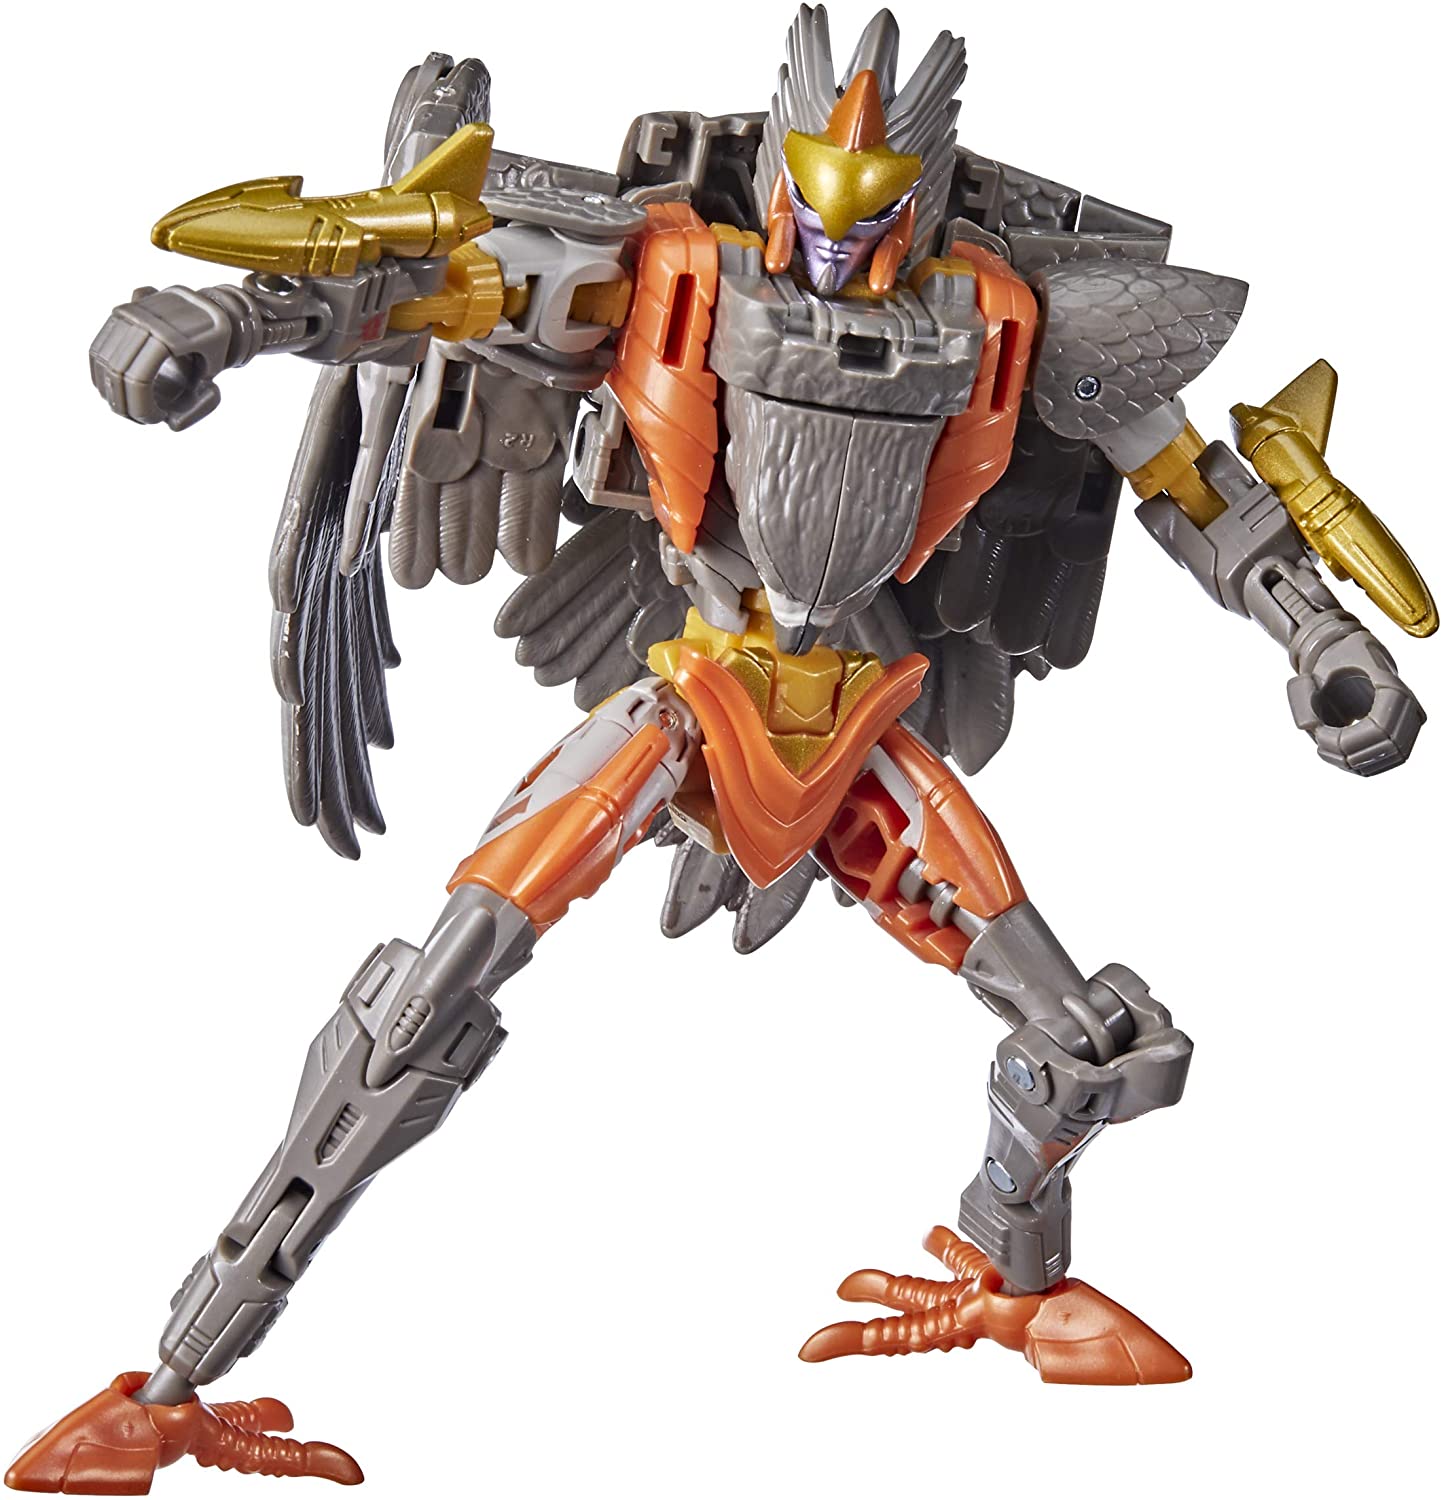 Transformers Toys Generations War for Cybertron: Kingdom Deluxe WFC-K14 Airazor Action Figure - Kids Ages 8 and Up, 5.5-inch